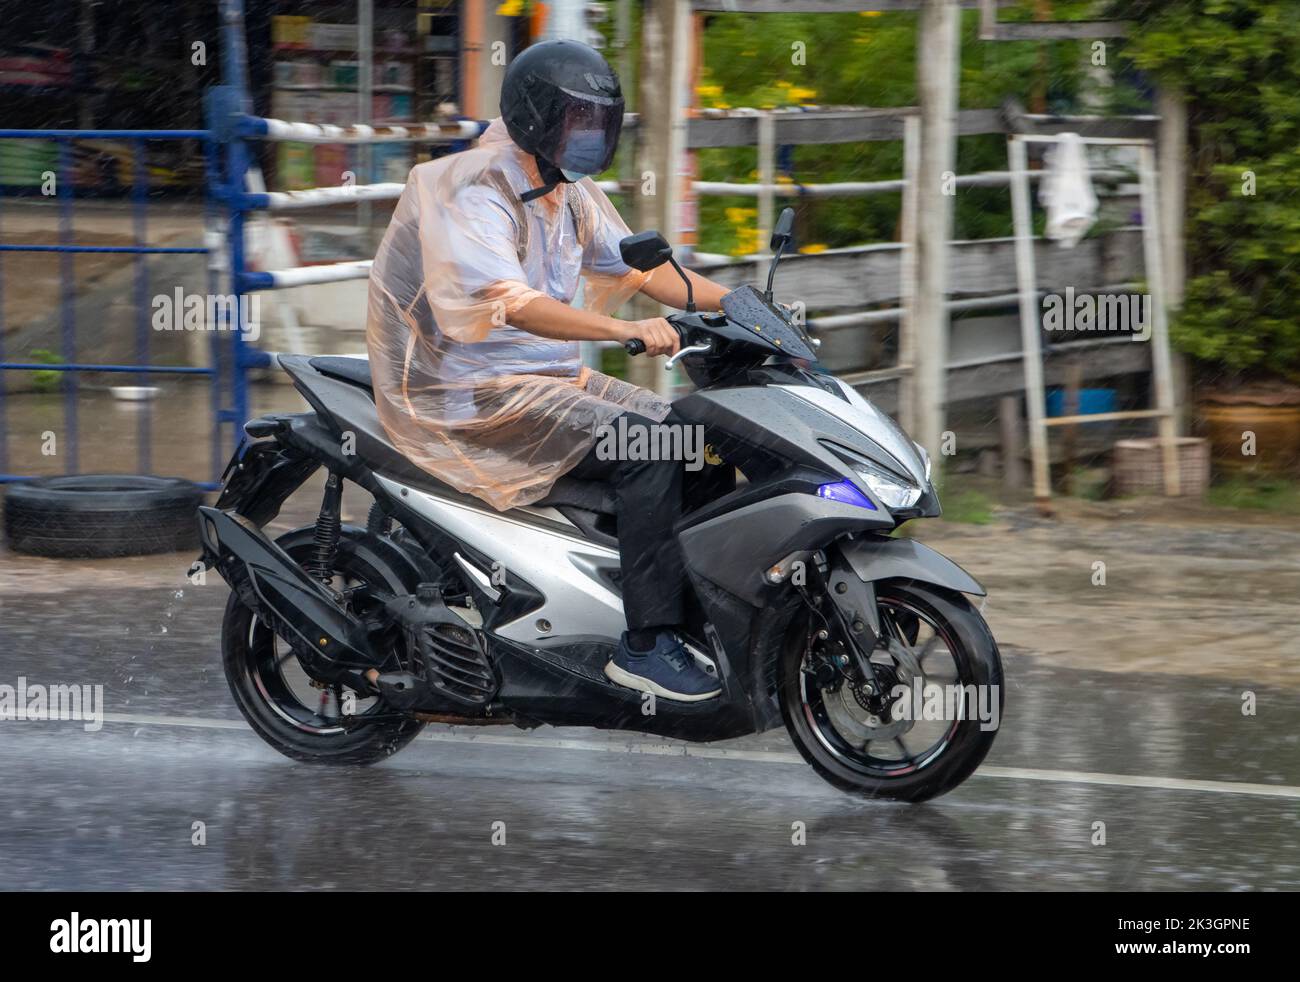 A man in a raincoat rides a motorcycle on the street in heavy rain Stock Photo